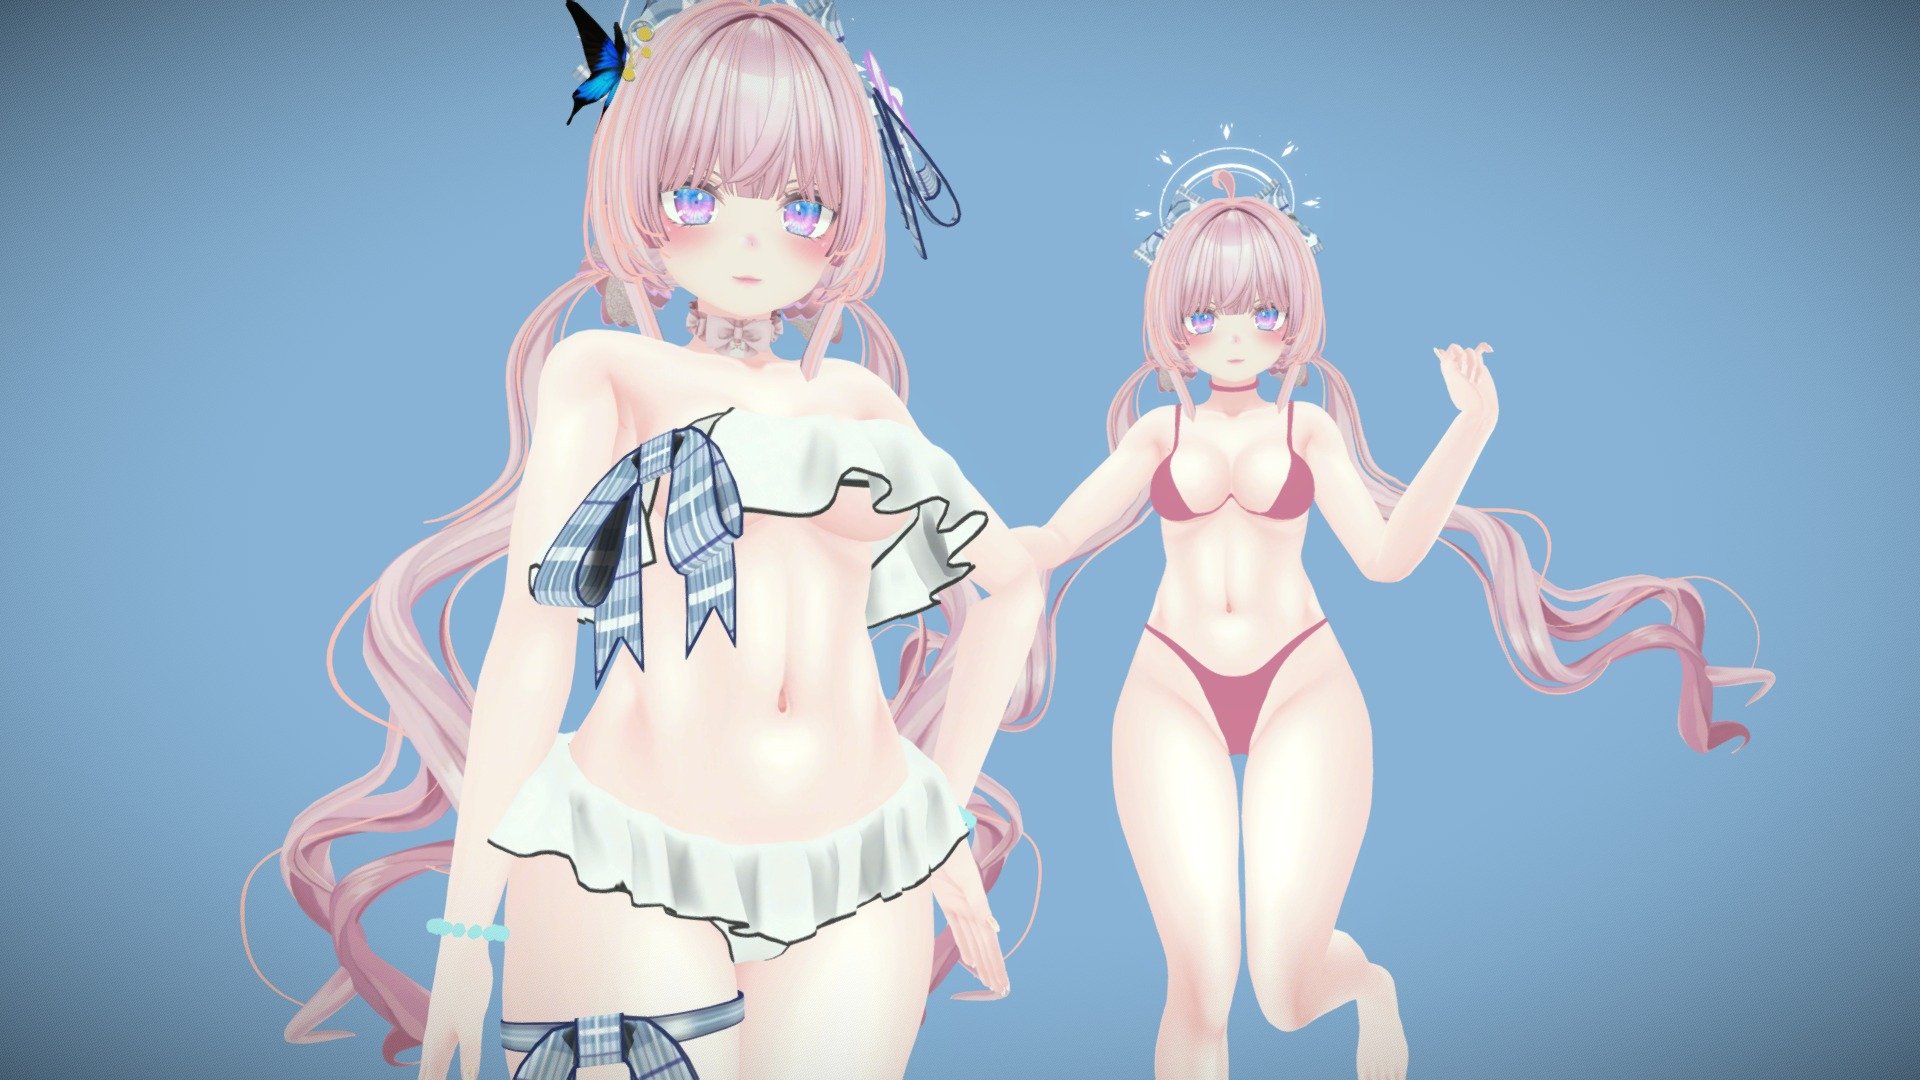 Anime girl Bikini Costume
Model contains:
-Shadeless only
-Textures 
-Rigged - Beach summer - 3D model by Dystopia (@anhtle2010) 3d model